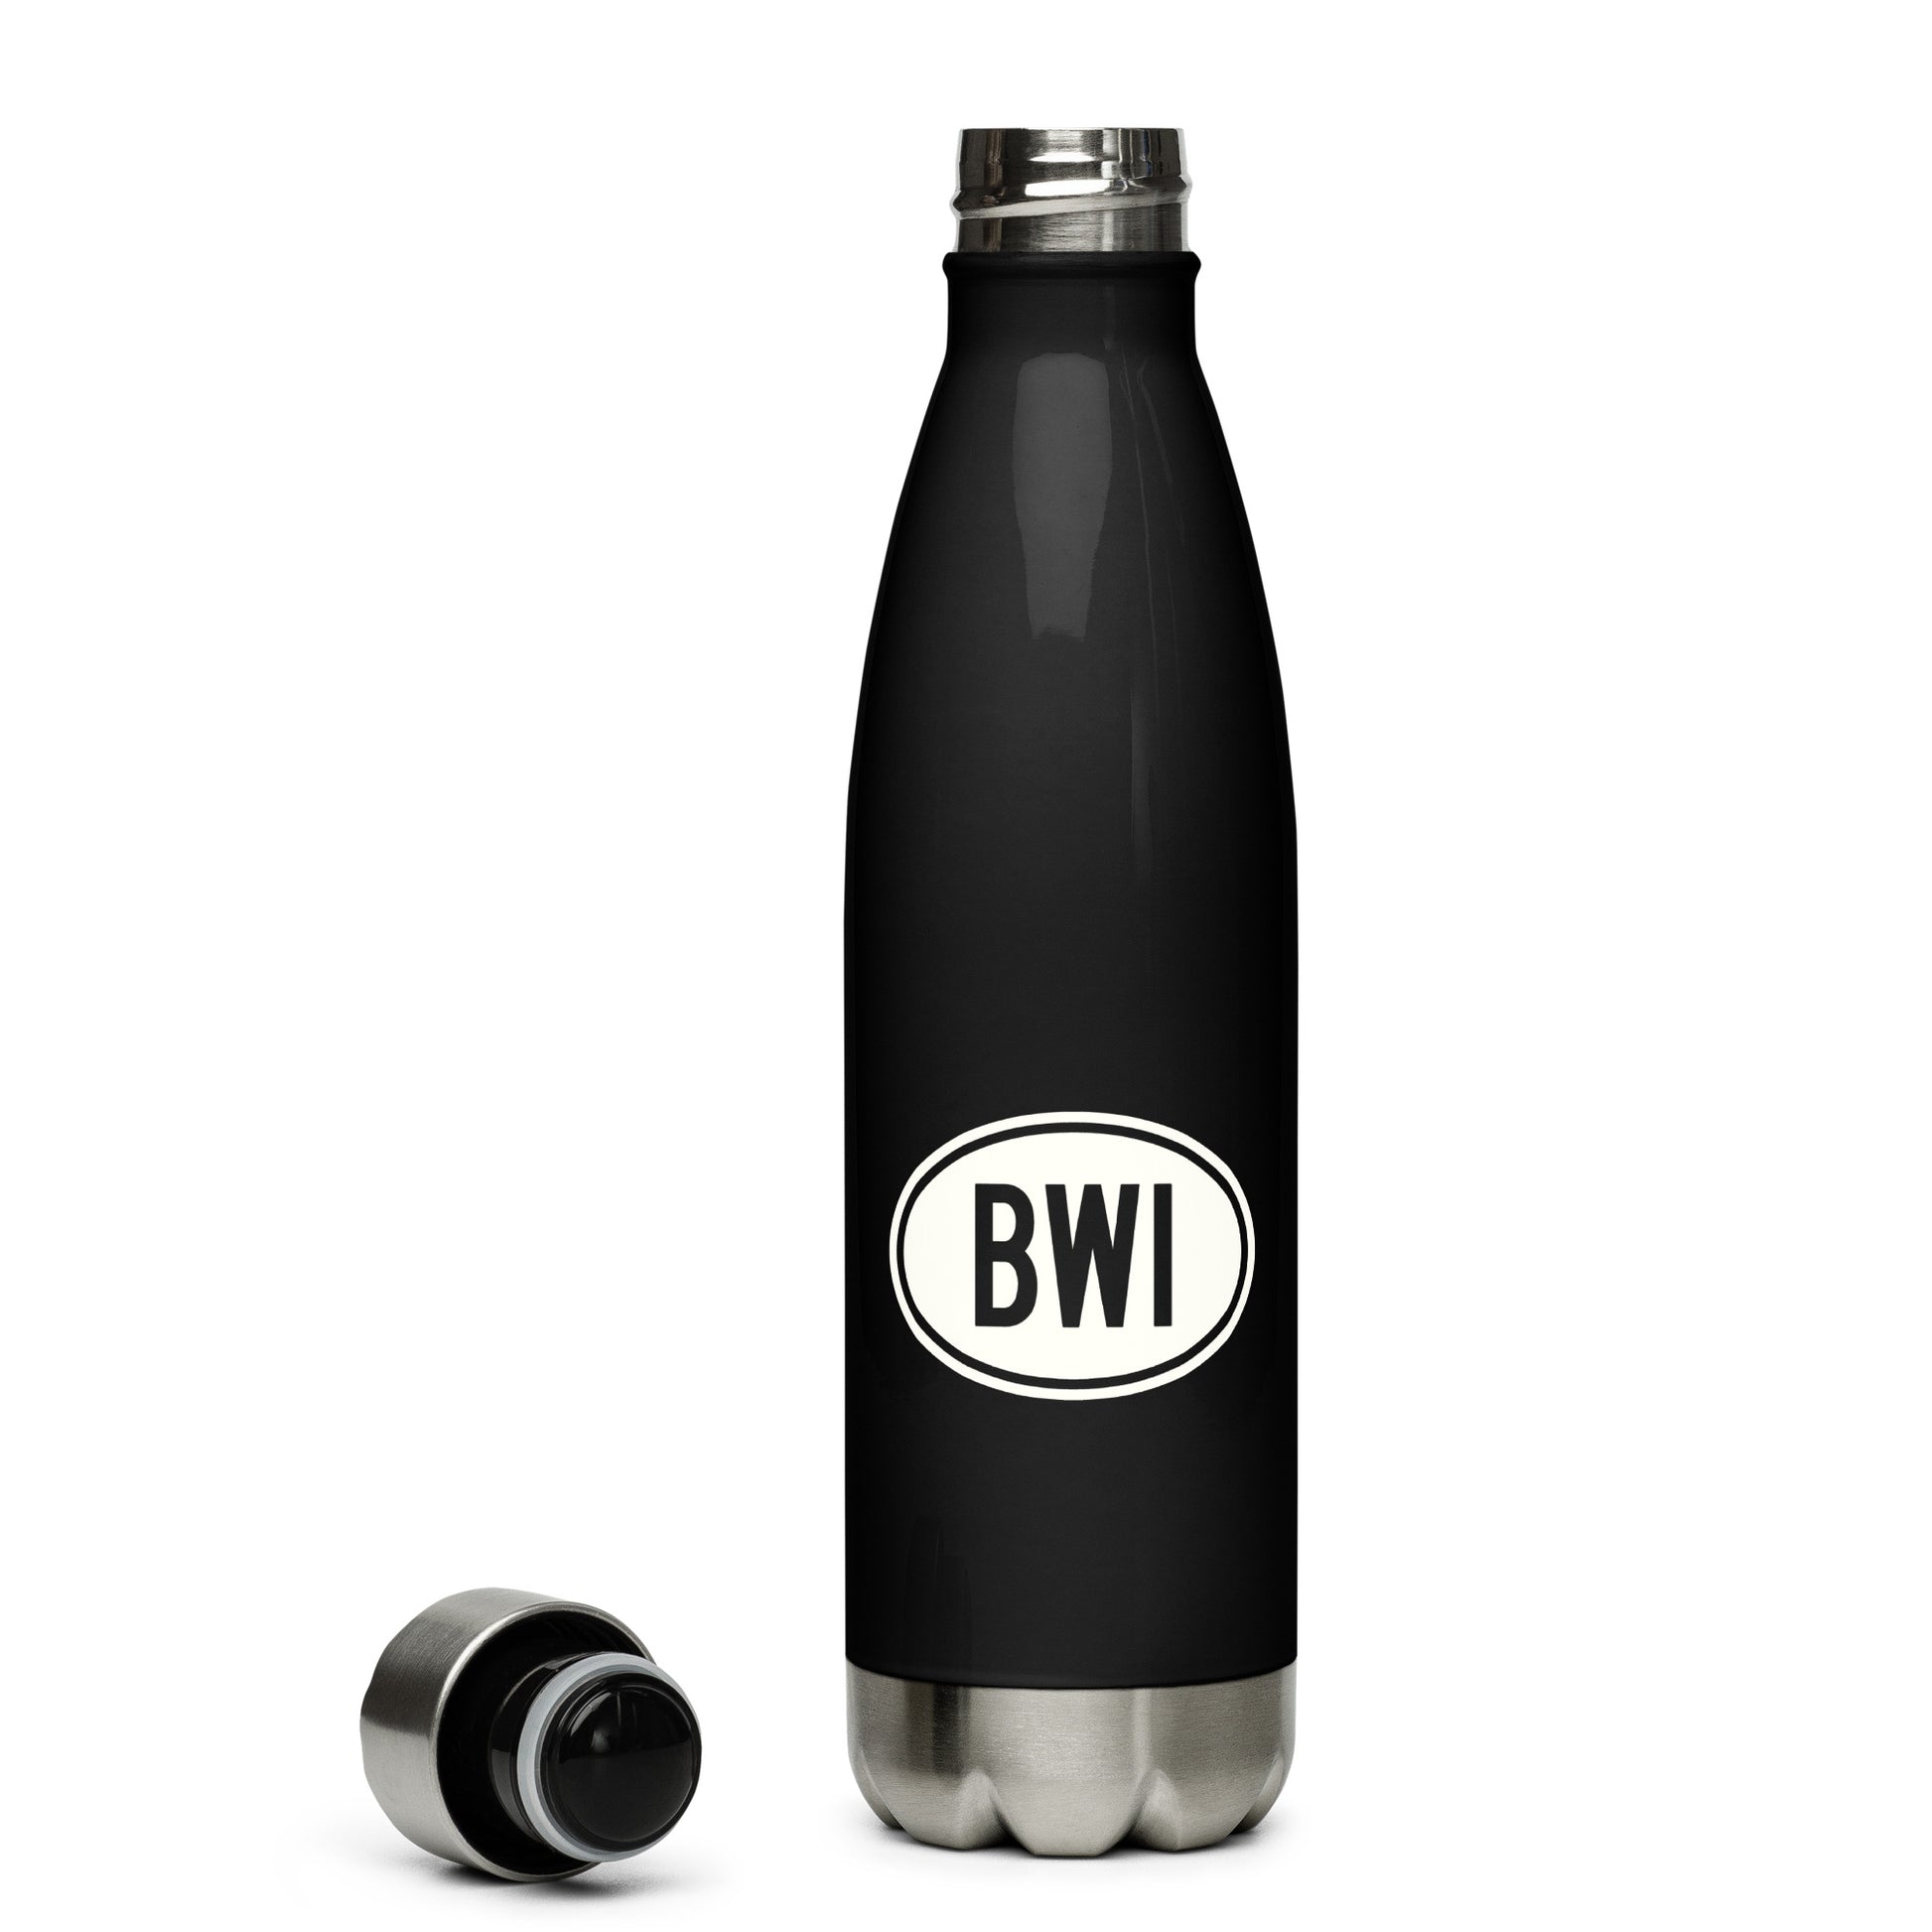 Unique Travel Gift Water Bottle - White Oval • BWI Baltimore • YHM Designs - Image 04